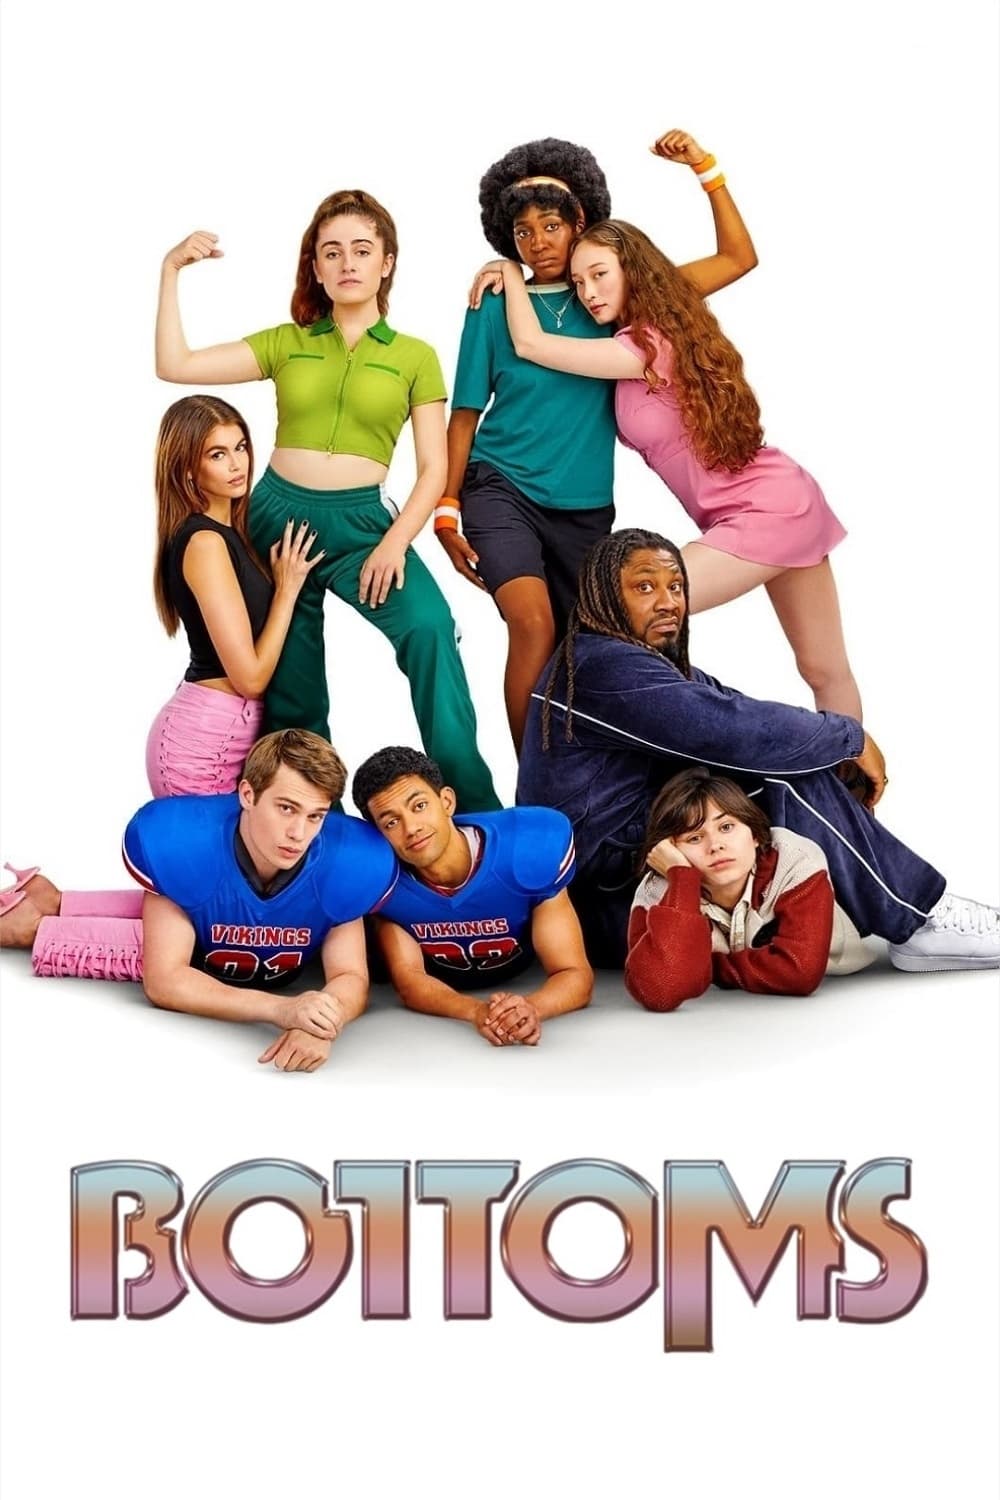 Bottoms Movie Review